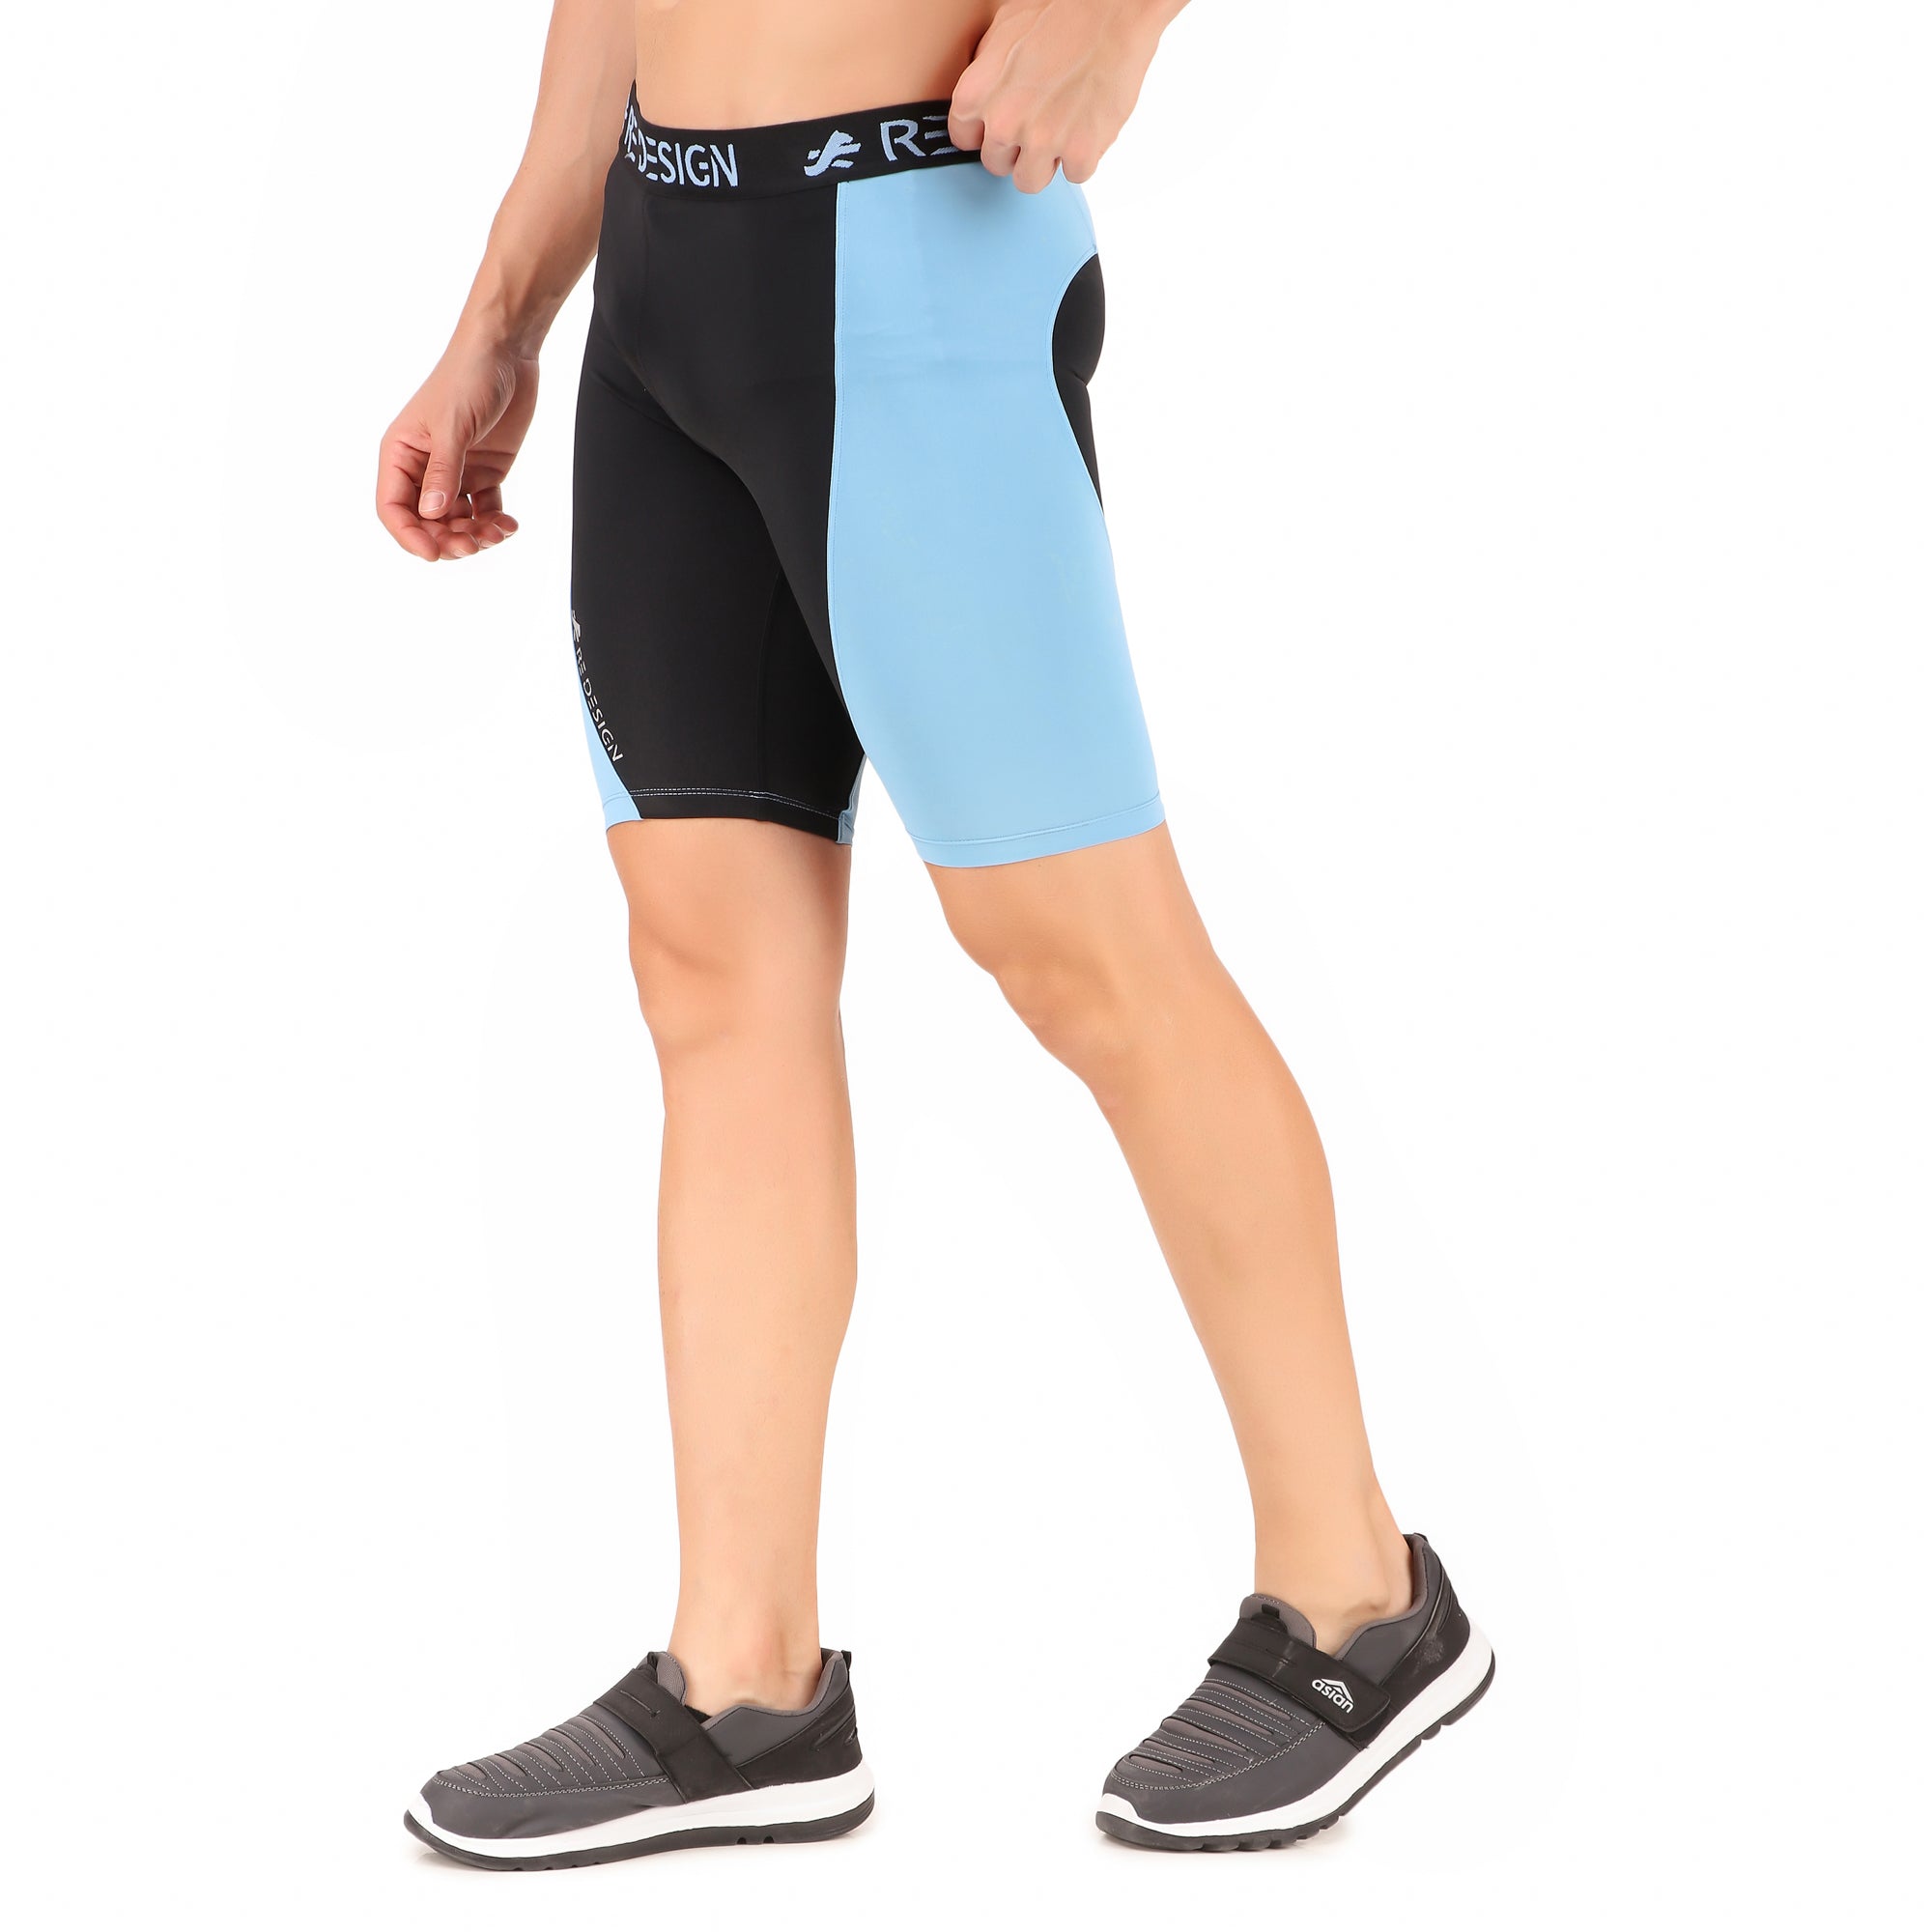 Nylon Compression Shorts and Half Tights For Men (Sky Blue) – ReDesign  Sports